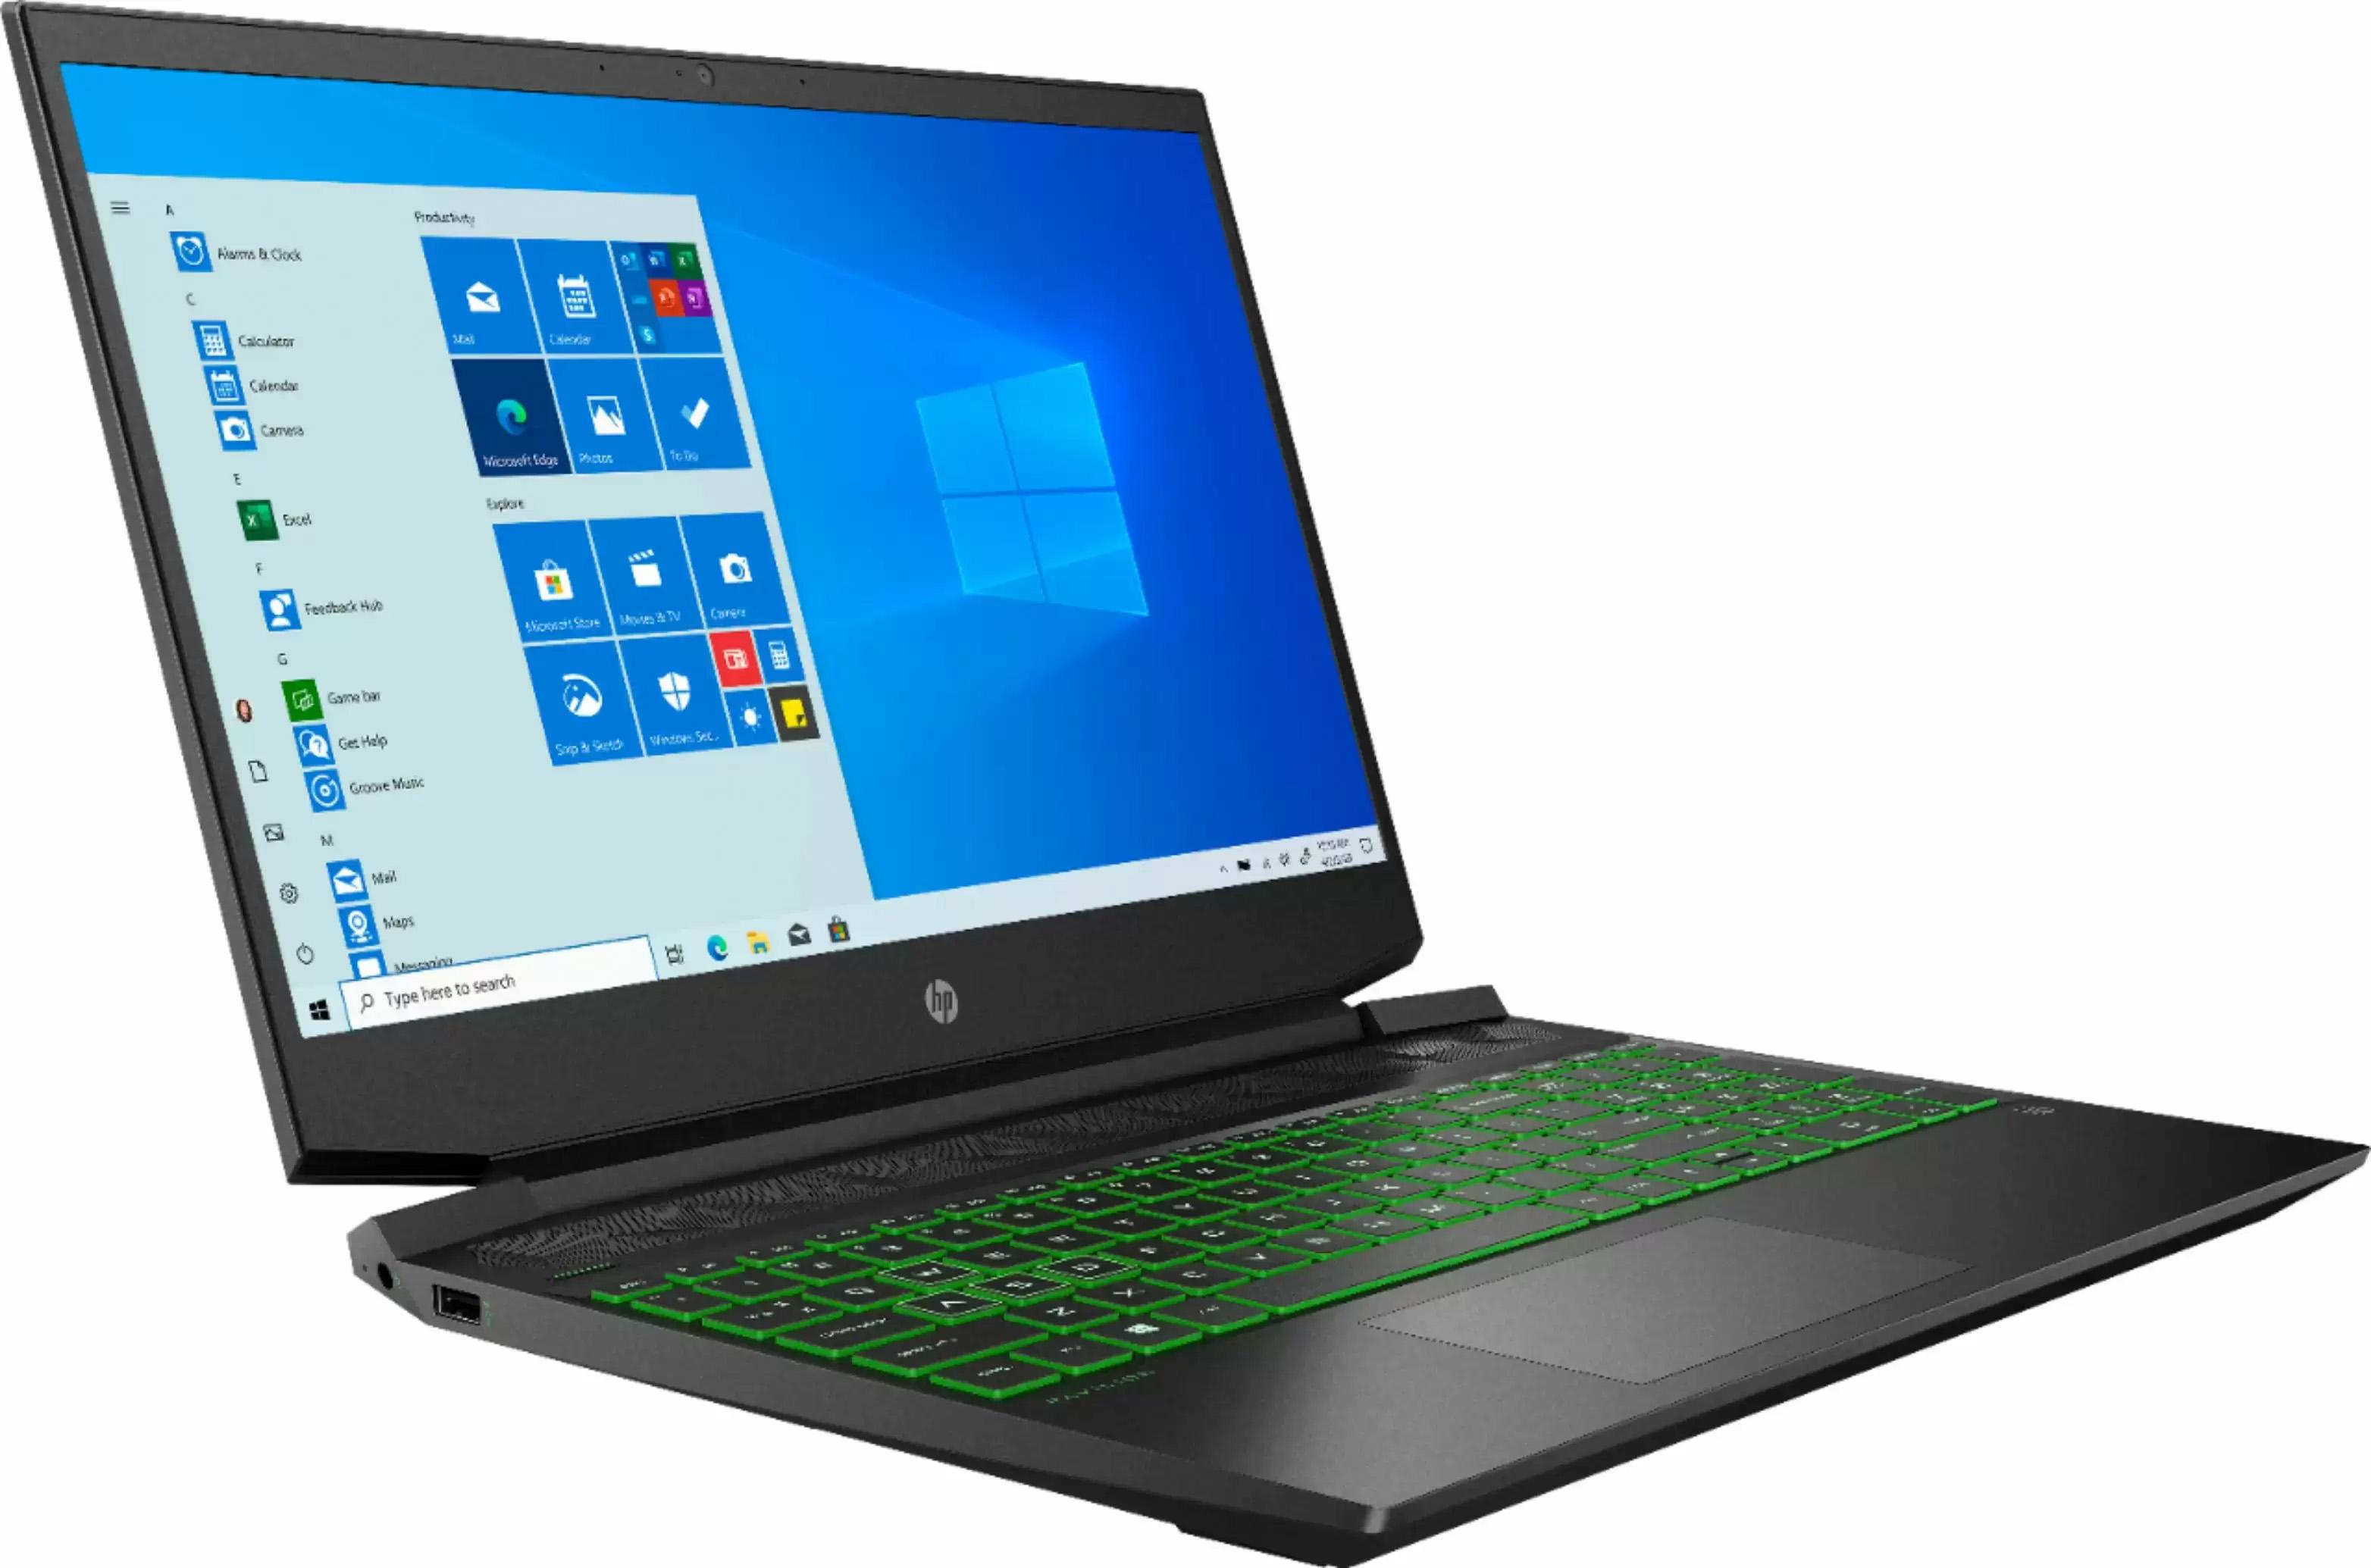 HP Pavilion 15.6in Ryzen 5 8GB 256GB Notebook Laptop for $449.99 Shipped